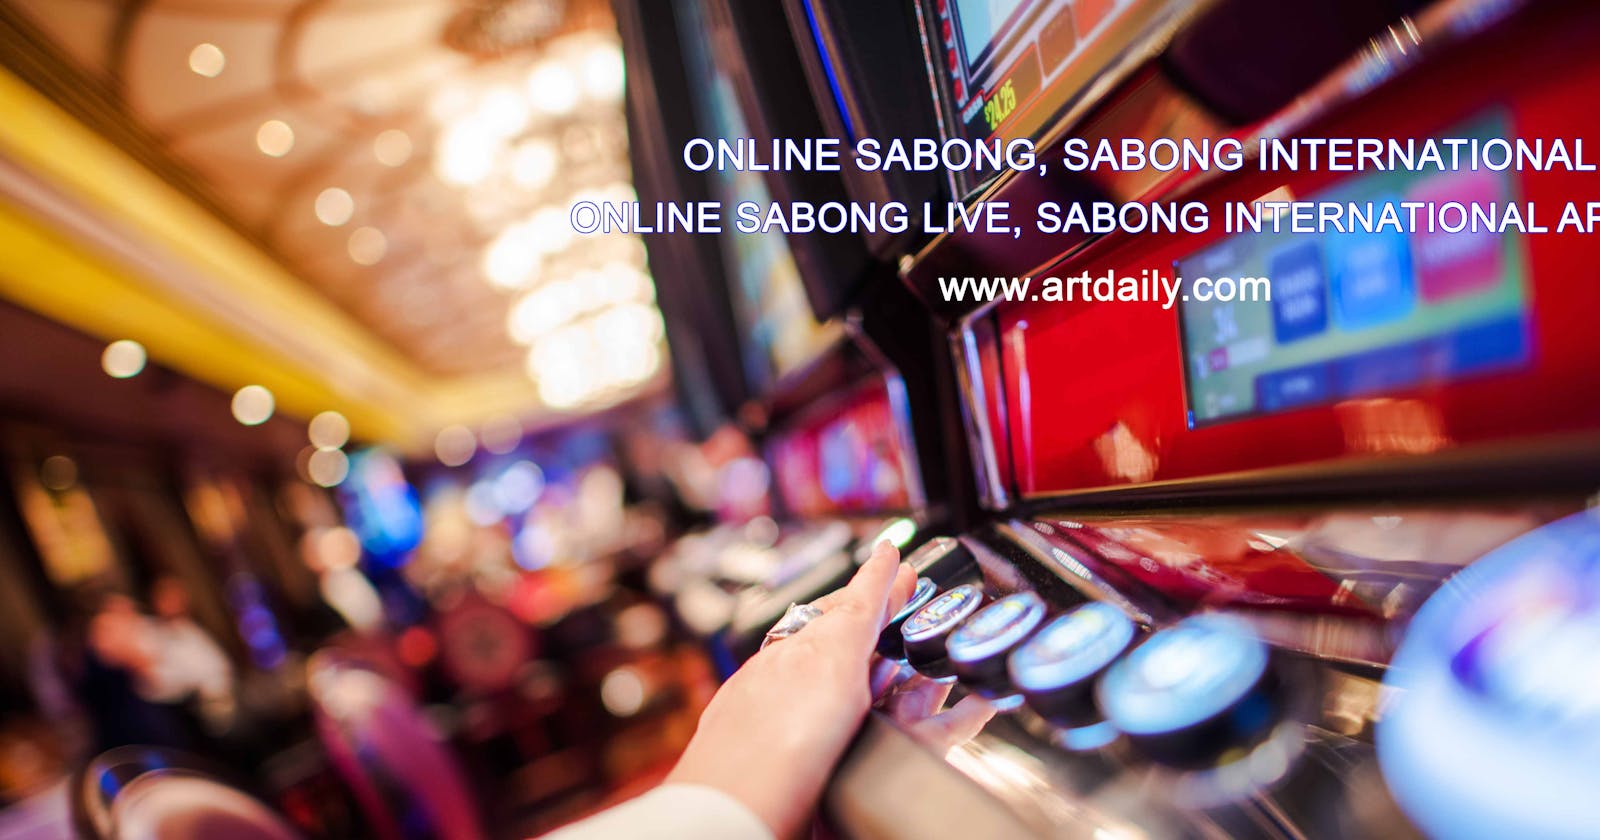 S888 Live and SW418 Live: The Latest in Online Sabong Platforms